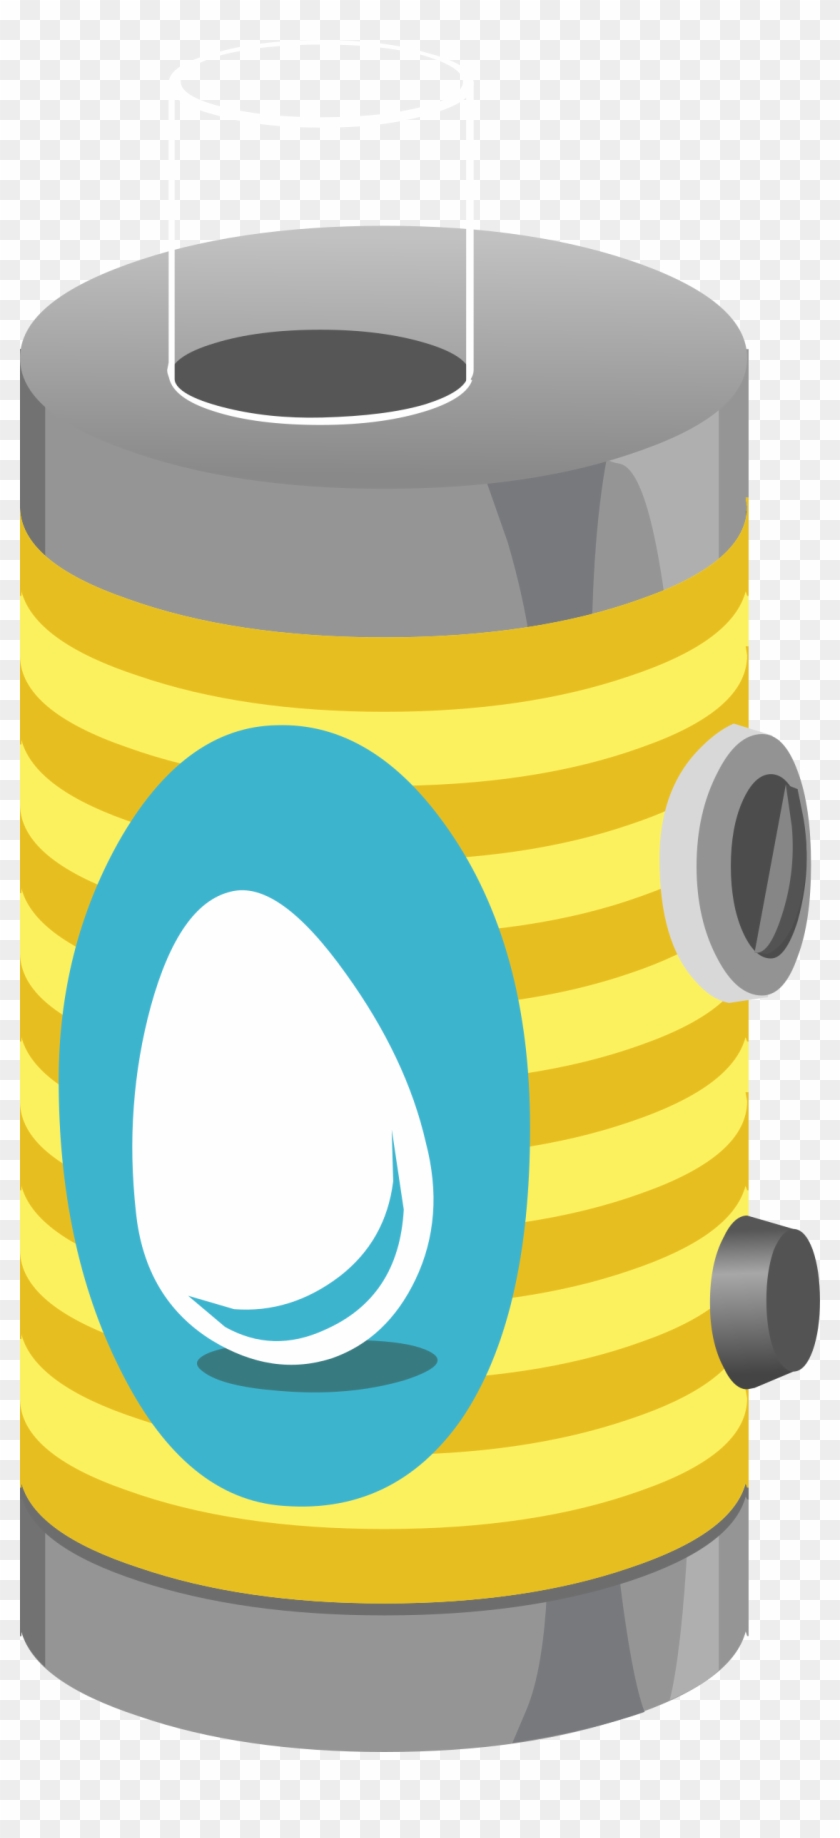 This Free Icons Png Design Of Tools Egg Seasoner Clipart #4894556